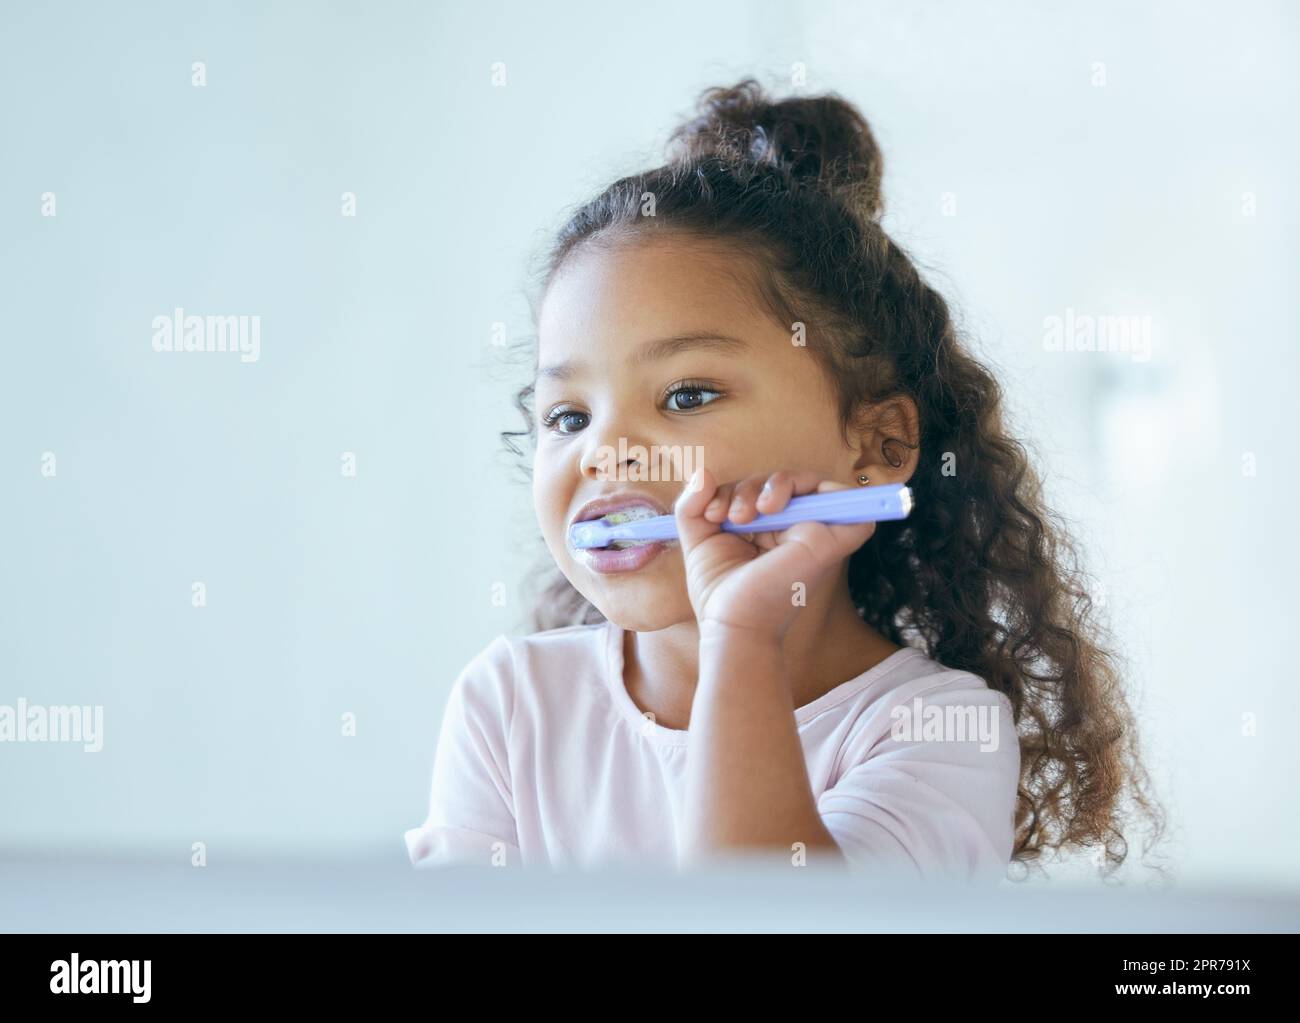 Getting minty fresh breath. Shot of a little girl brushing her teeth in a bathroom at home. Stock Photo